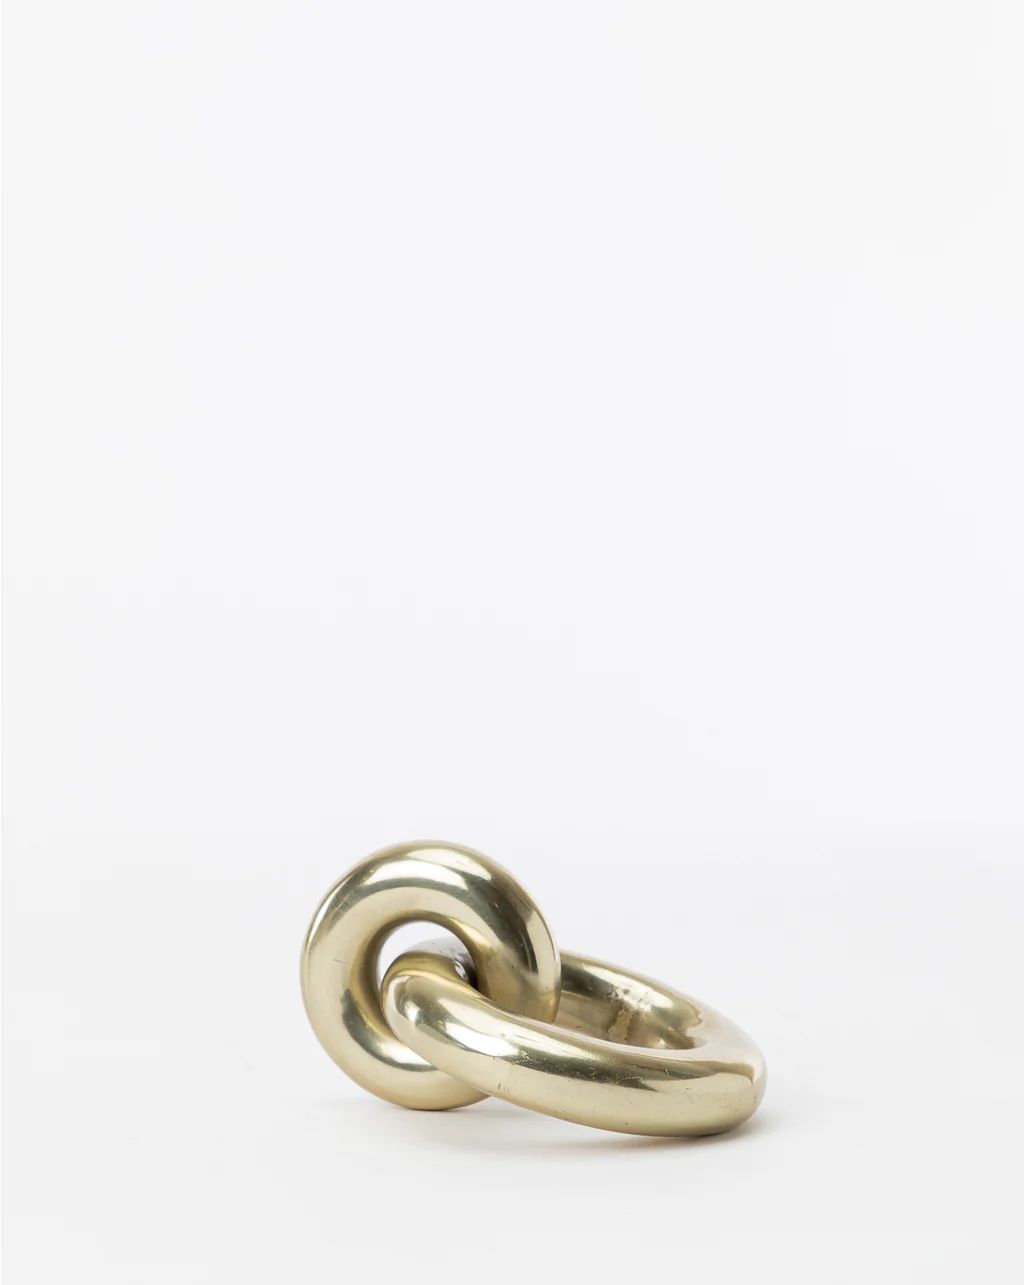 Brass Loop Object | McGee & Co.